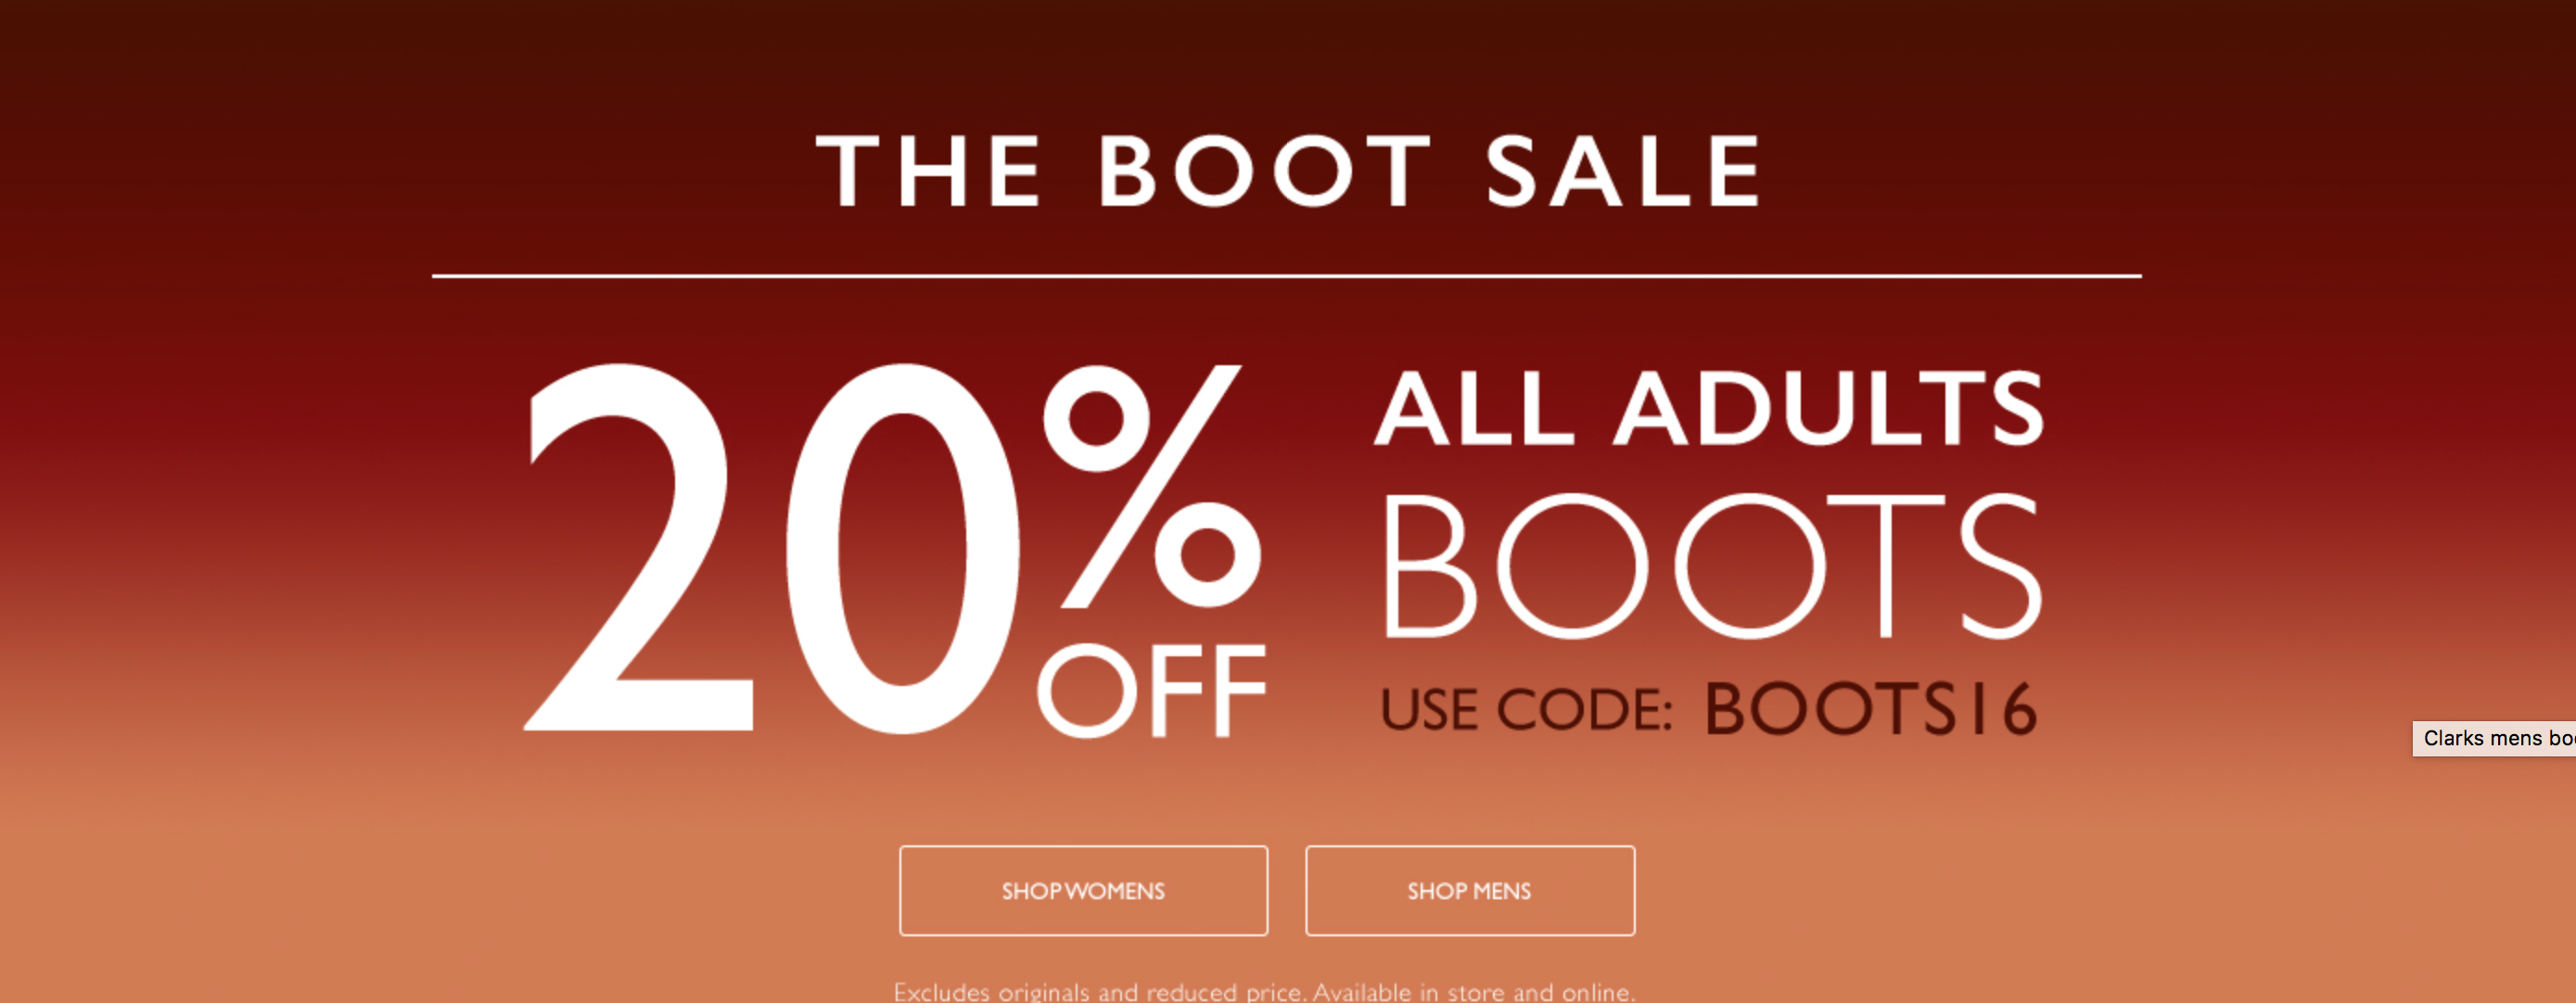 Clarks: Sale 20% off all adults boots